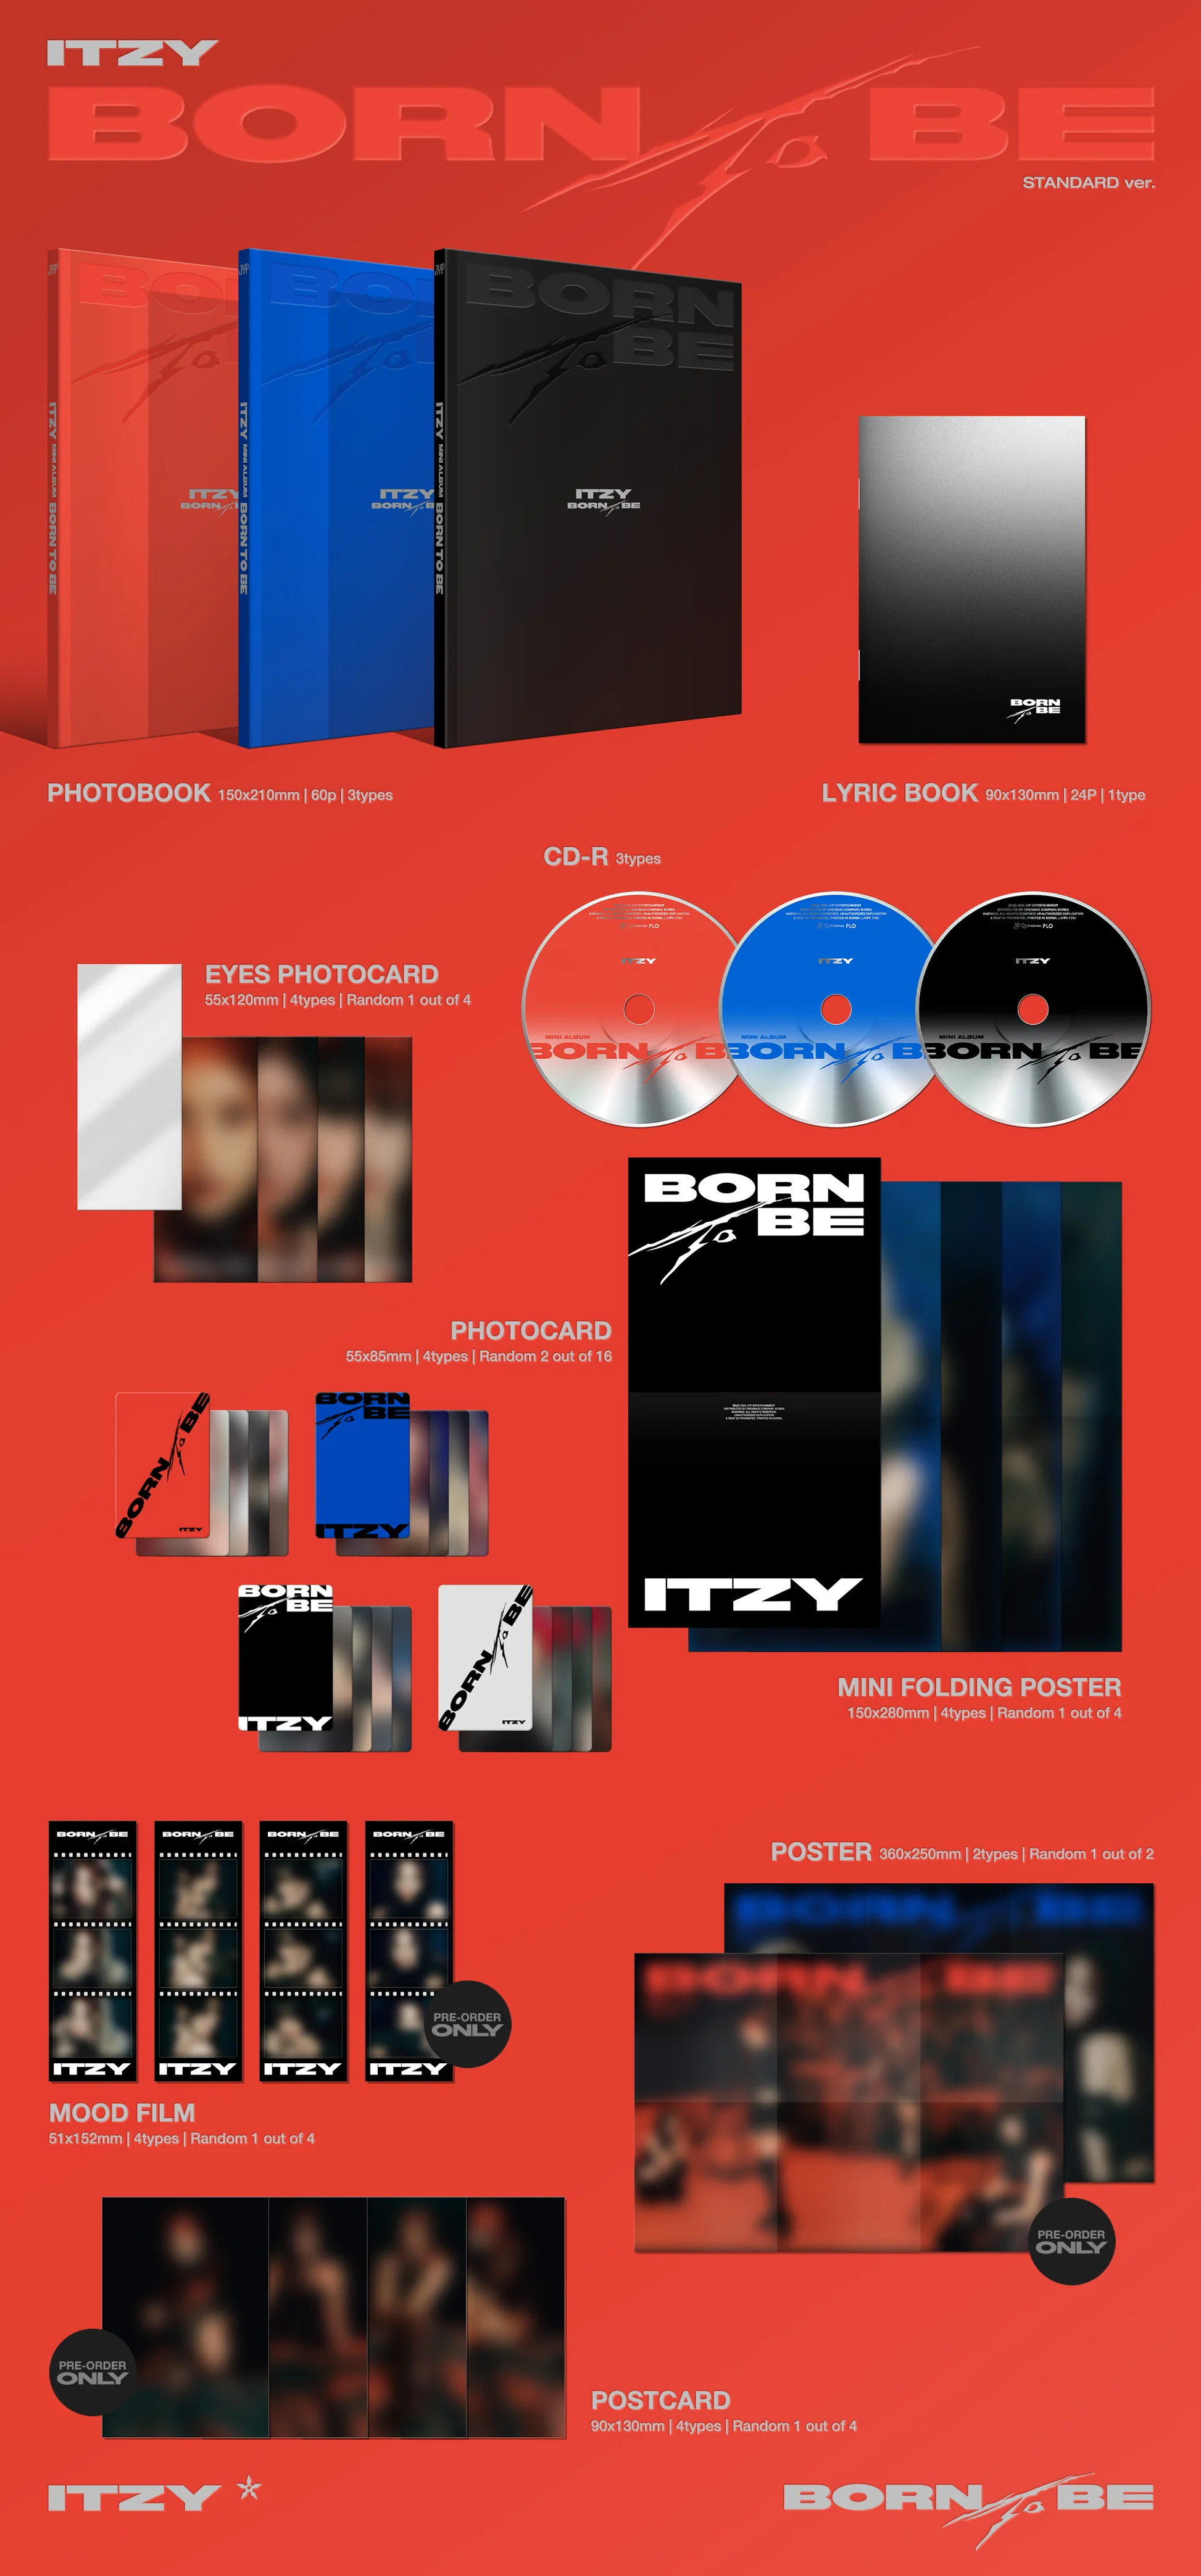 ITZY BORN TO BE STANDARD EDITION ALBUM INFO